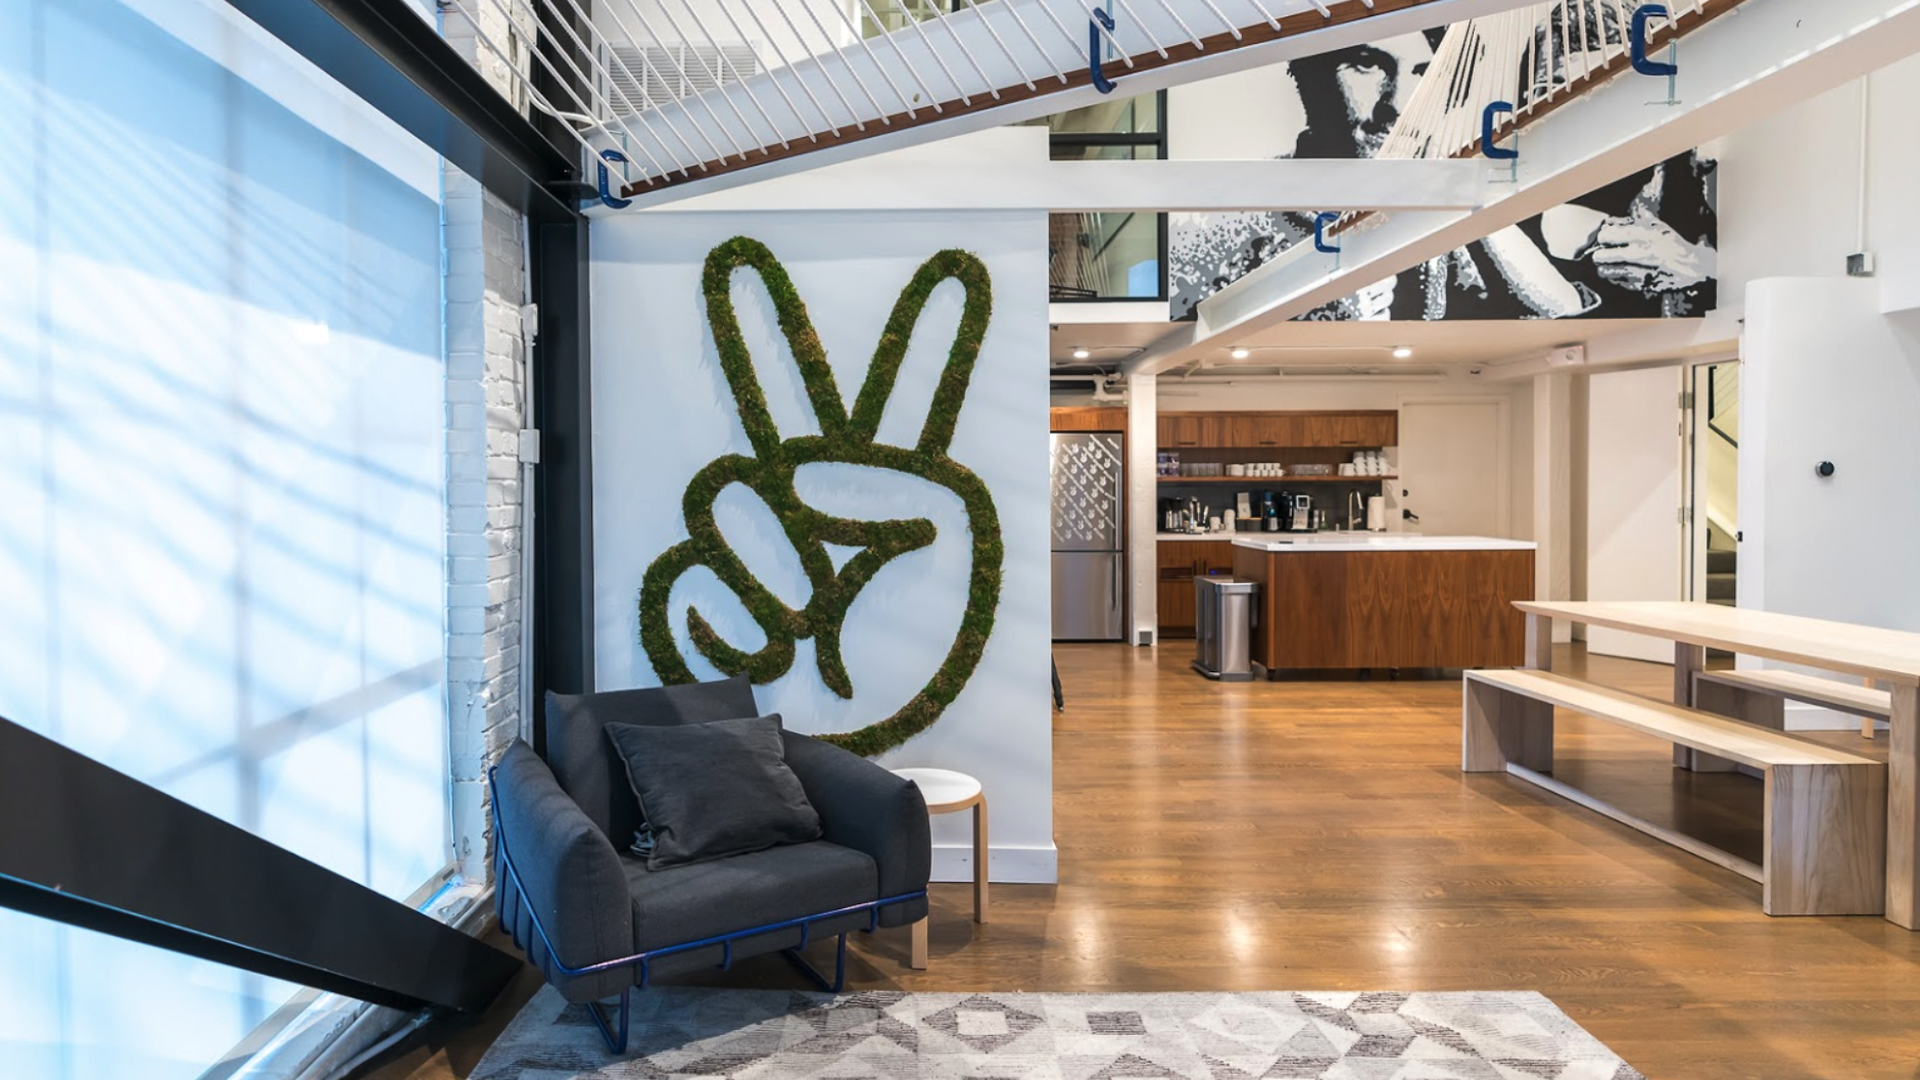 Photo of office of AngelList in San Francisco with logo on a white wall.